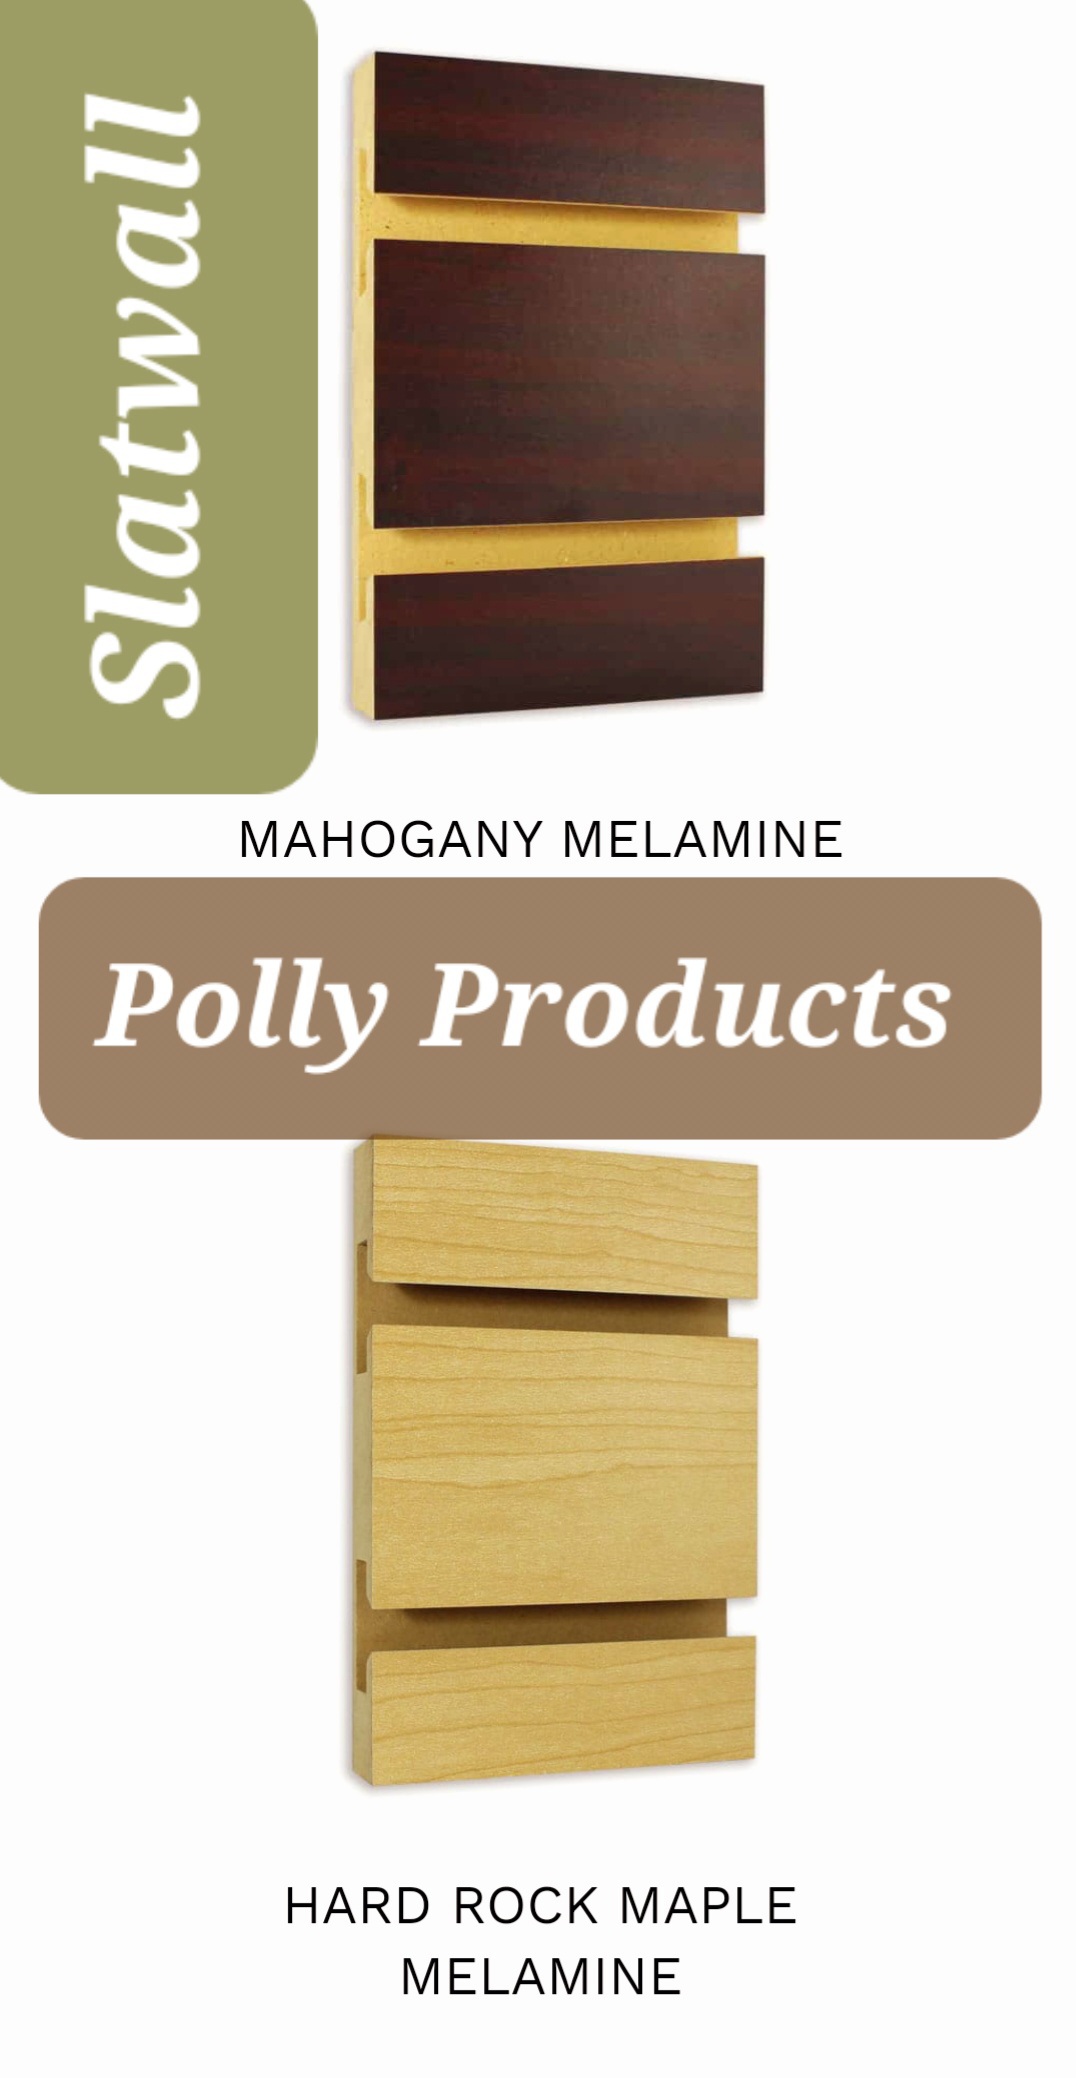 Polly Products SLATWALL PANELS. MADE IN THE USA QUALITY PRODUCTS SINCE 1976.